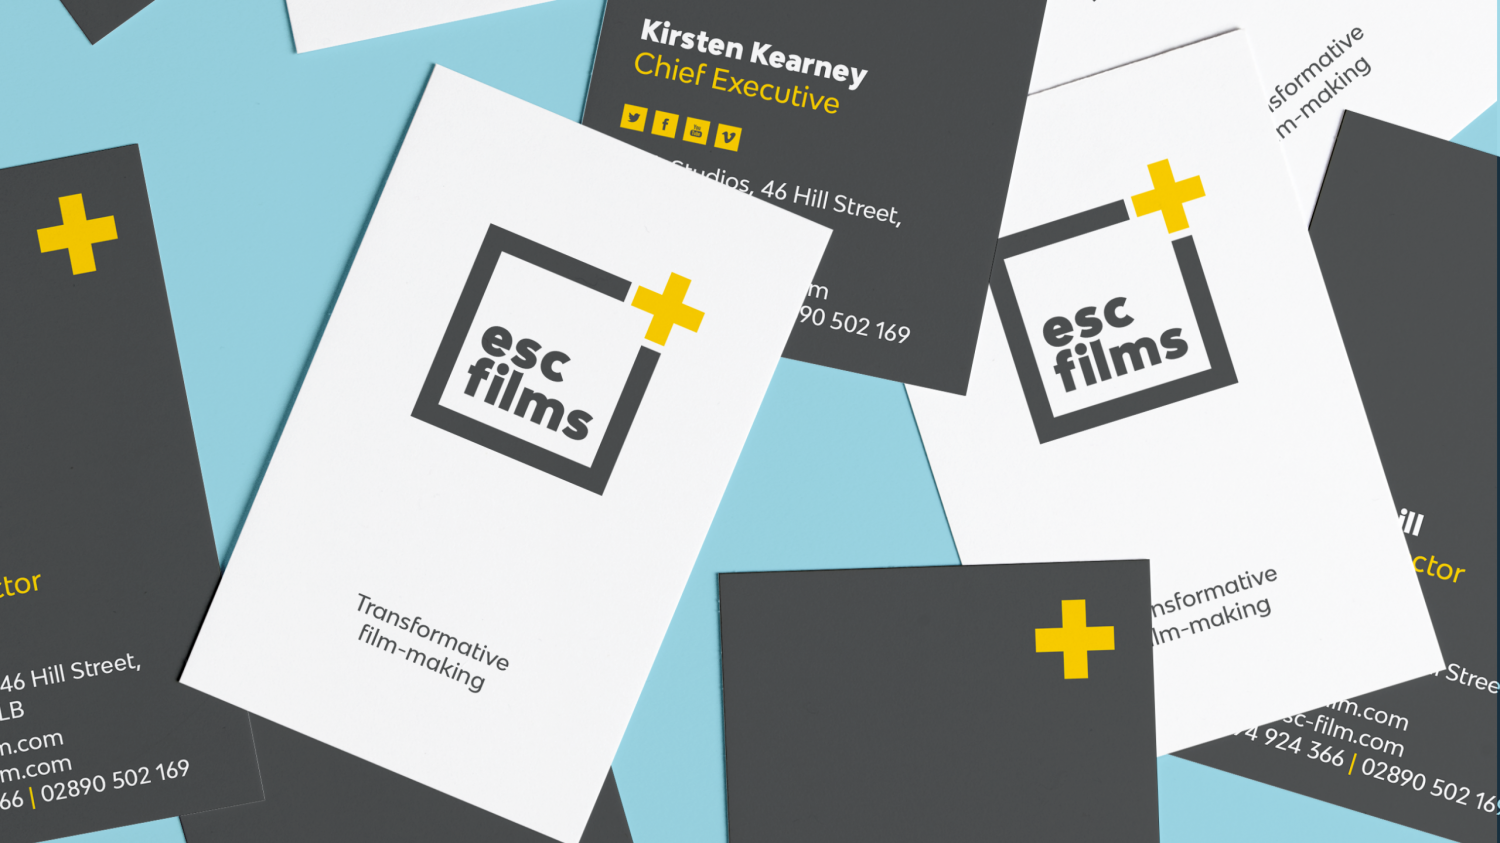 lots of grey and white business cards scattered on blue background with esc films logo and details